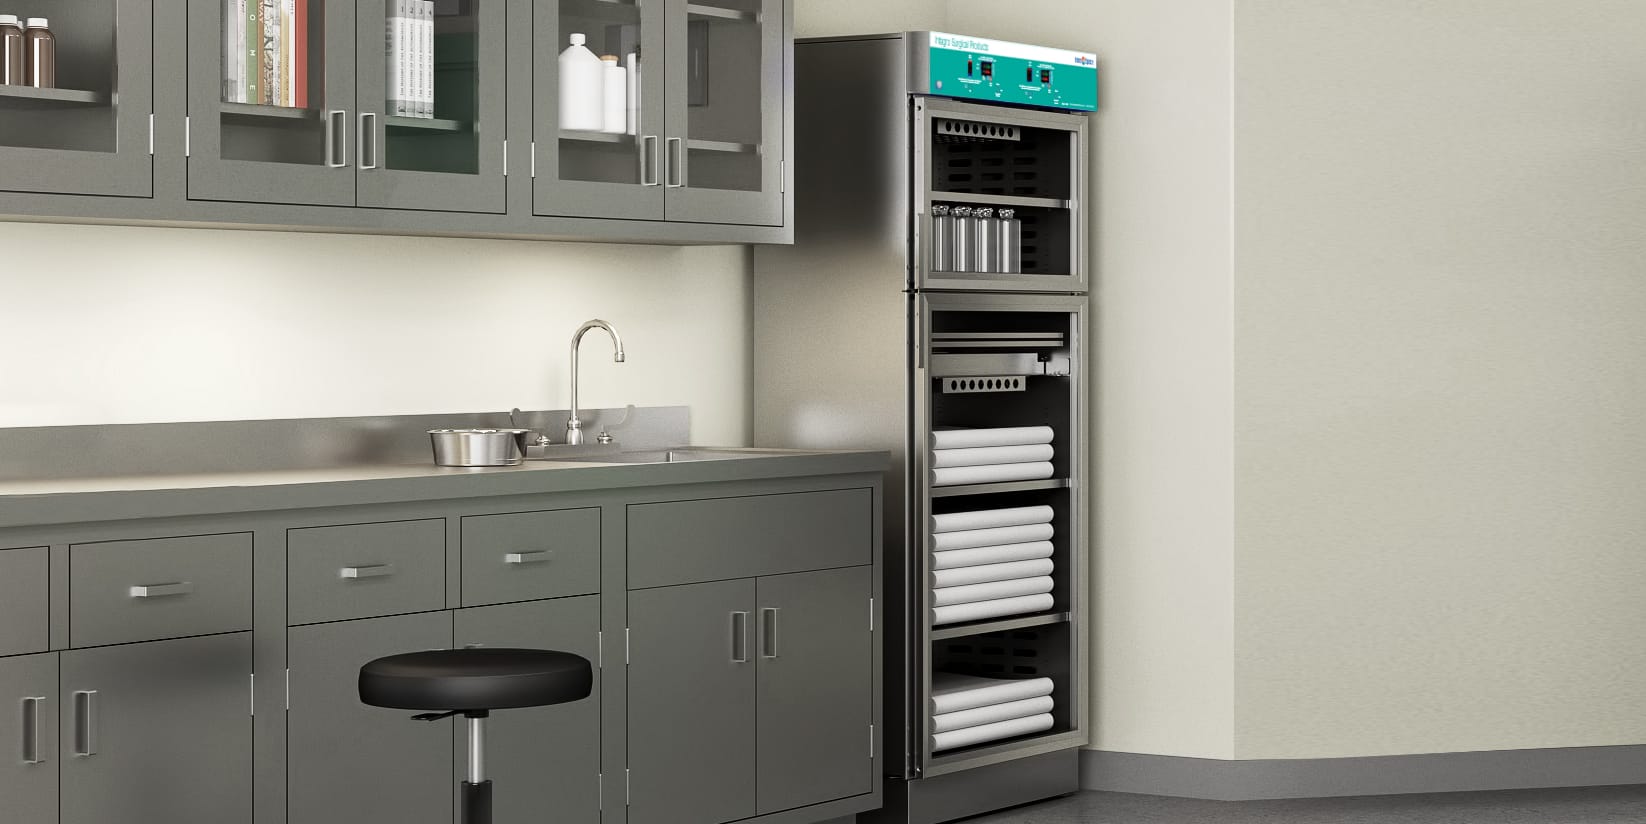 Dual chamber warming cabinet with 3 shelves